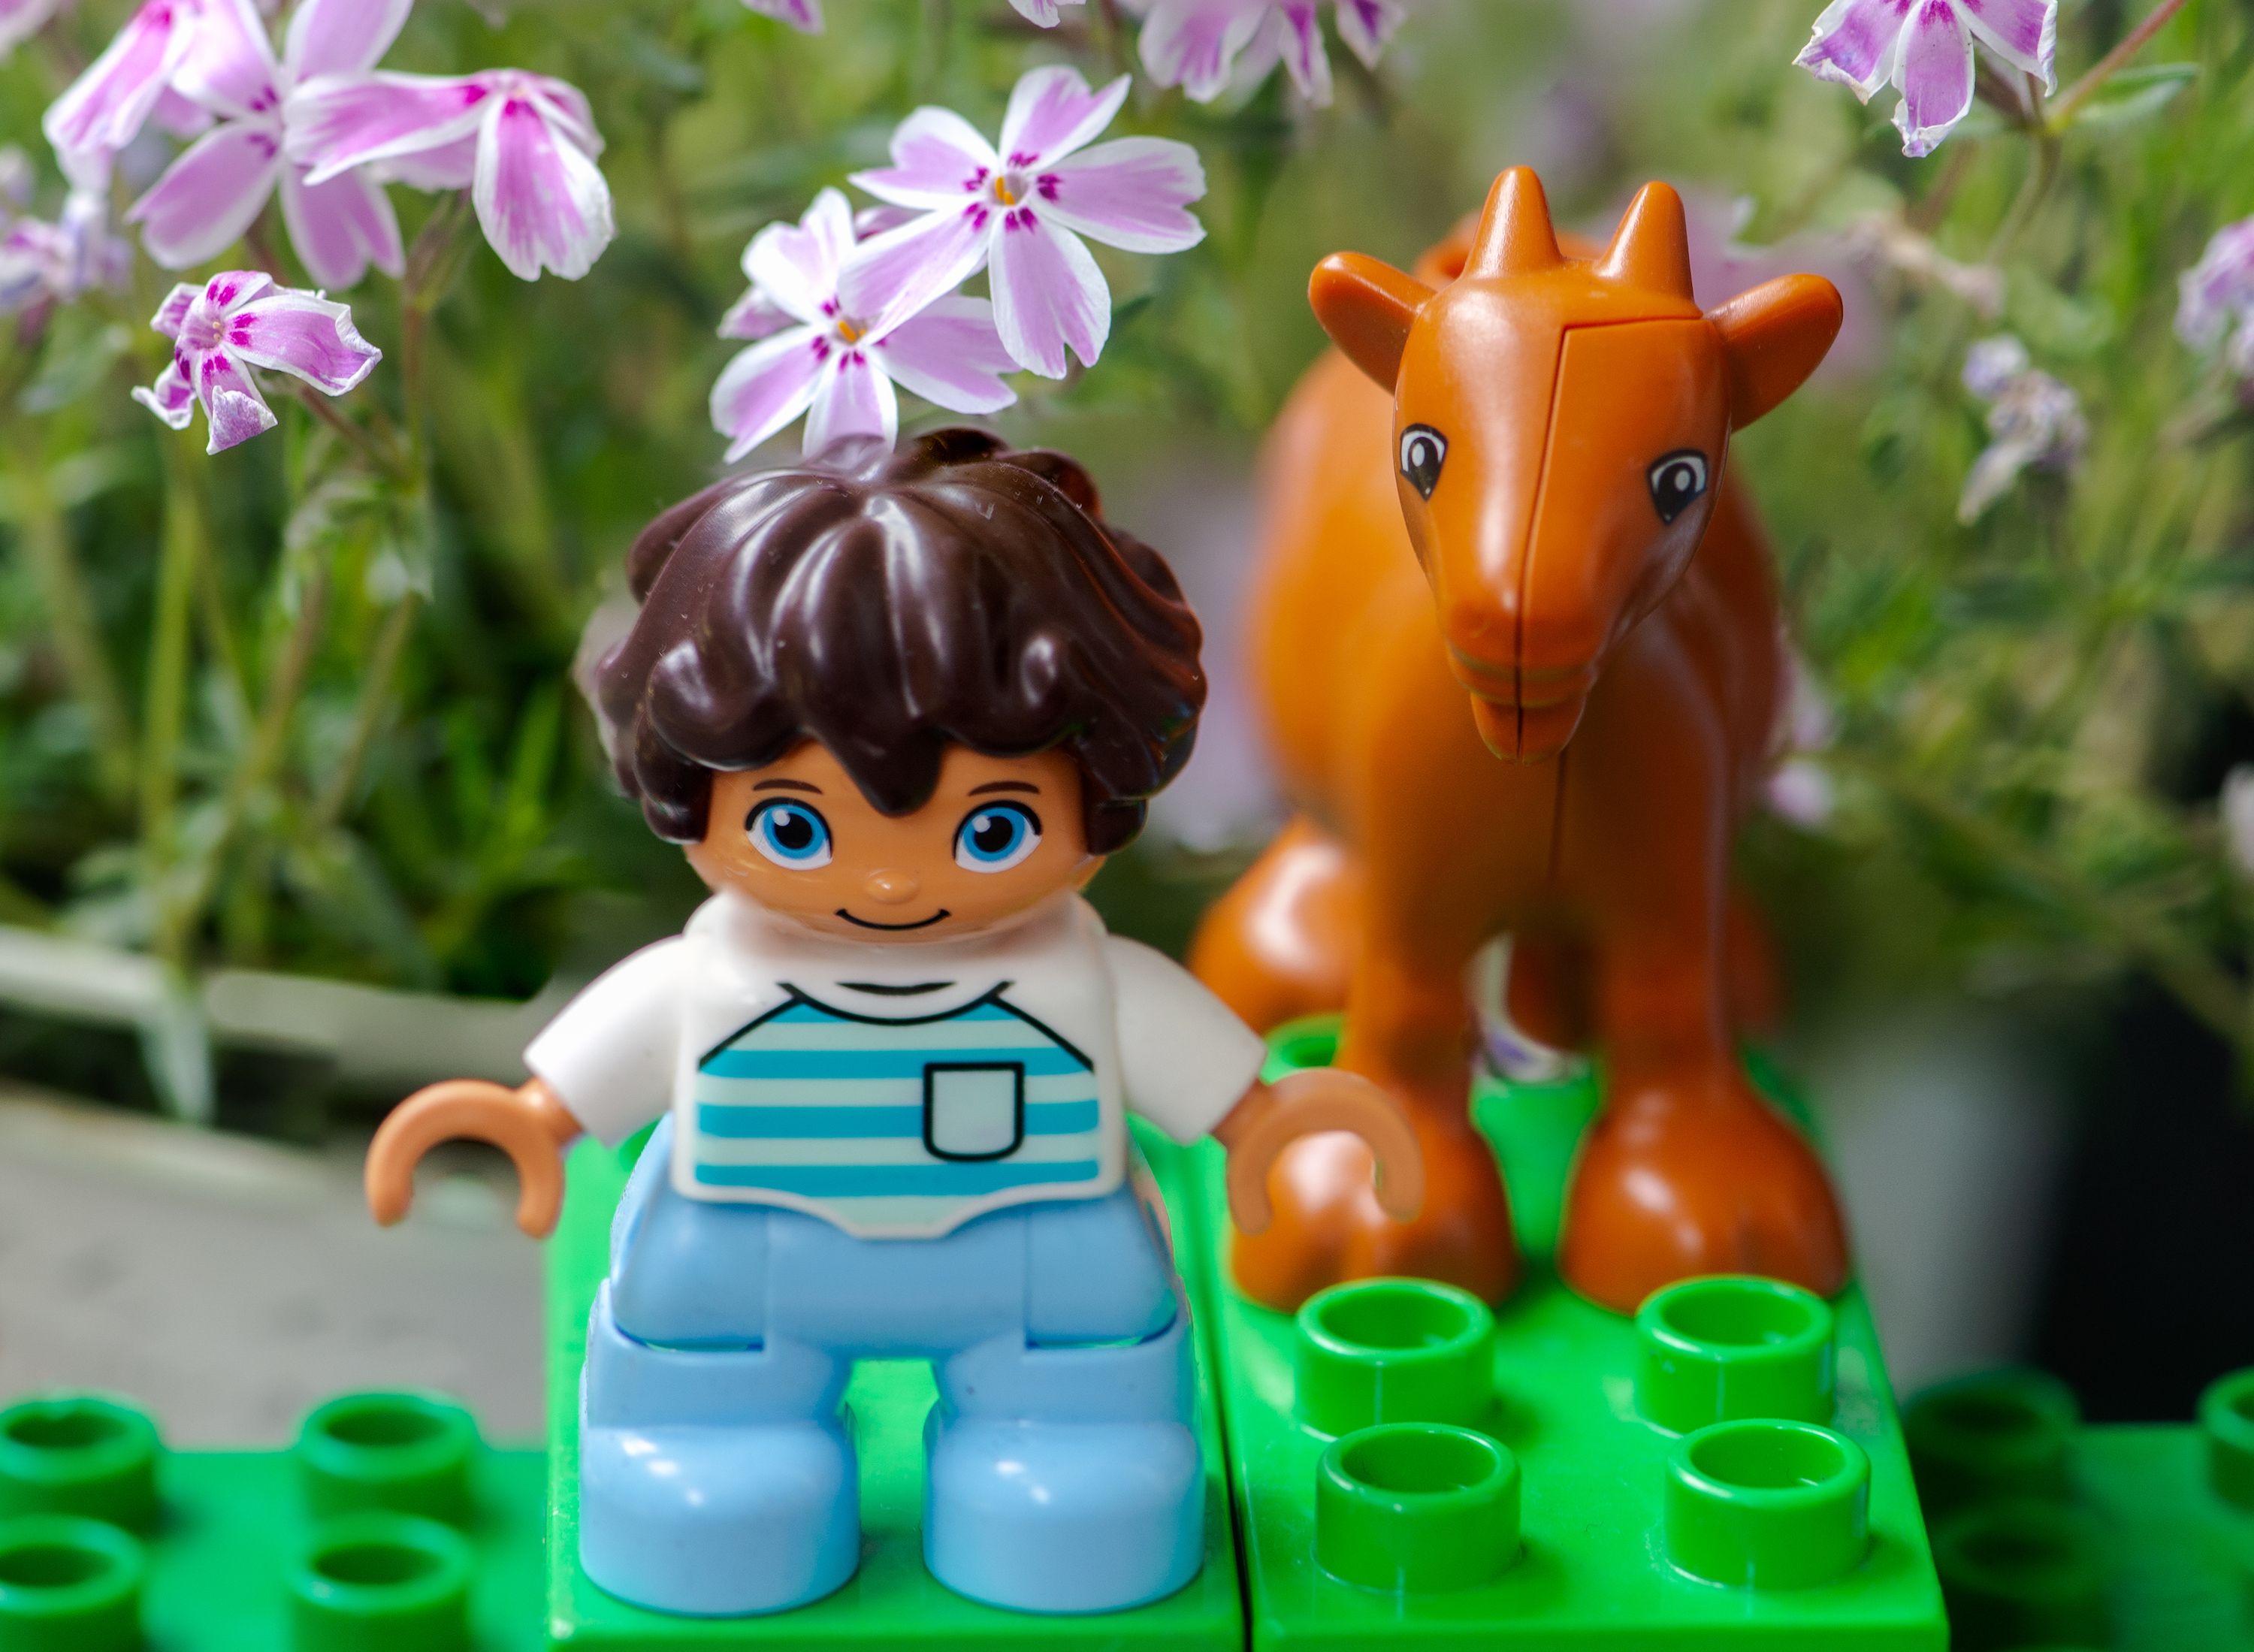 Lego Duplo child and goat mini figure in a floral background